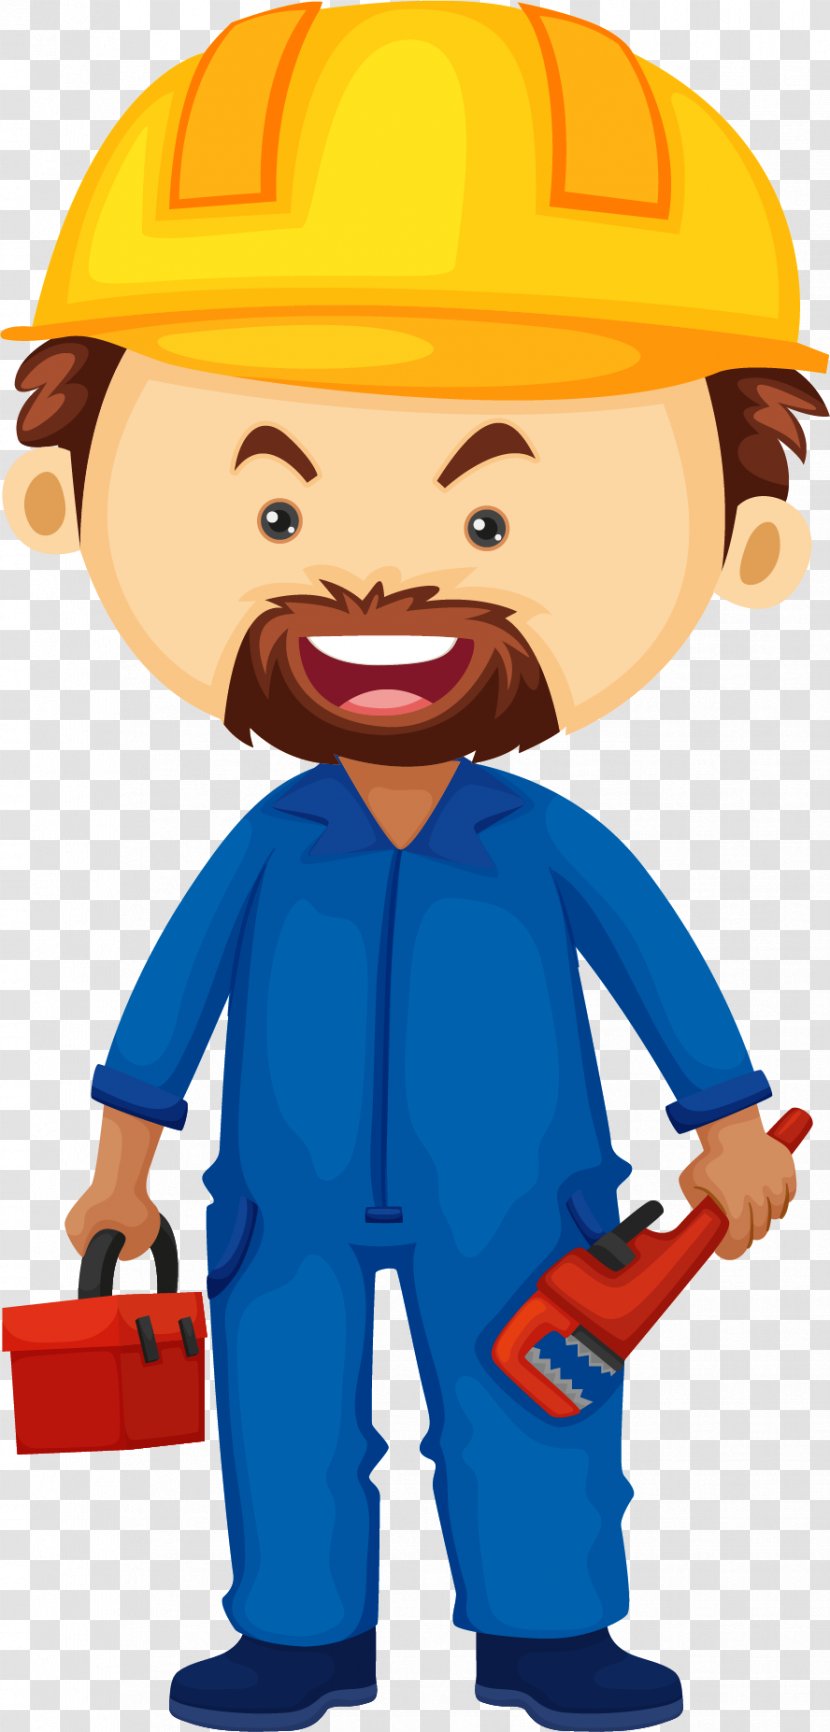 Job Stock Photography Royalty-free Illustration - Toy - Handle The Maintenance Engineer For Toolbox Transparent PNG